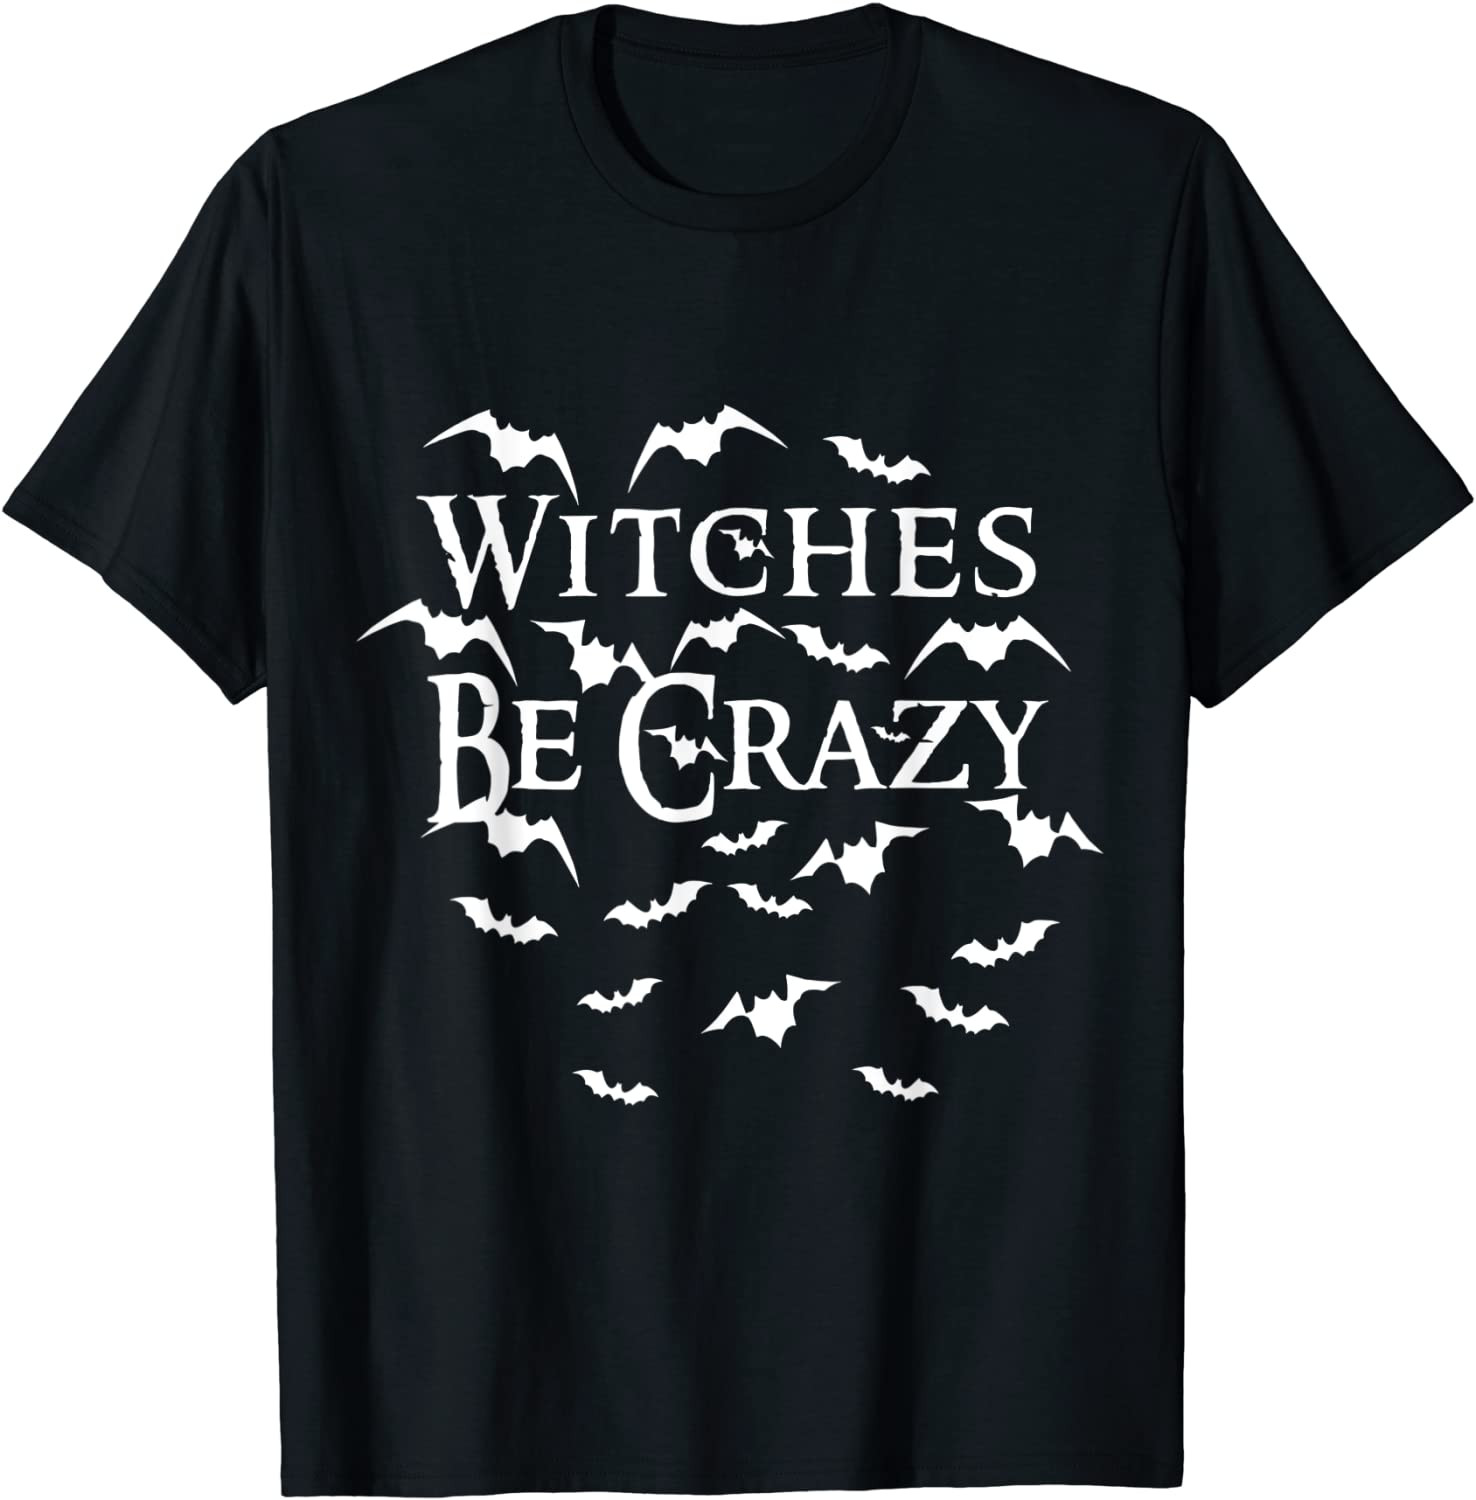 Witches Be Crazy With Bats Halloween Costume T-Shirt